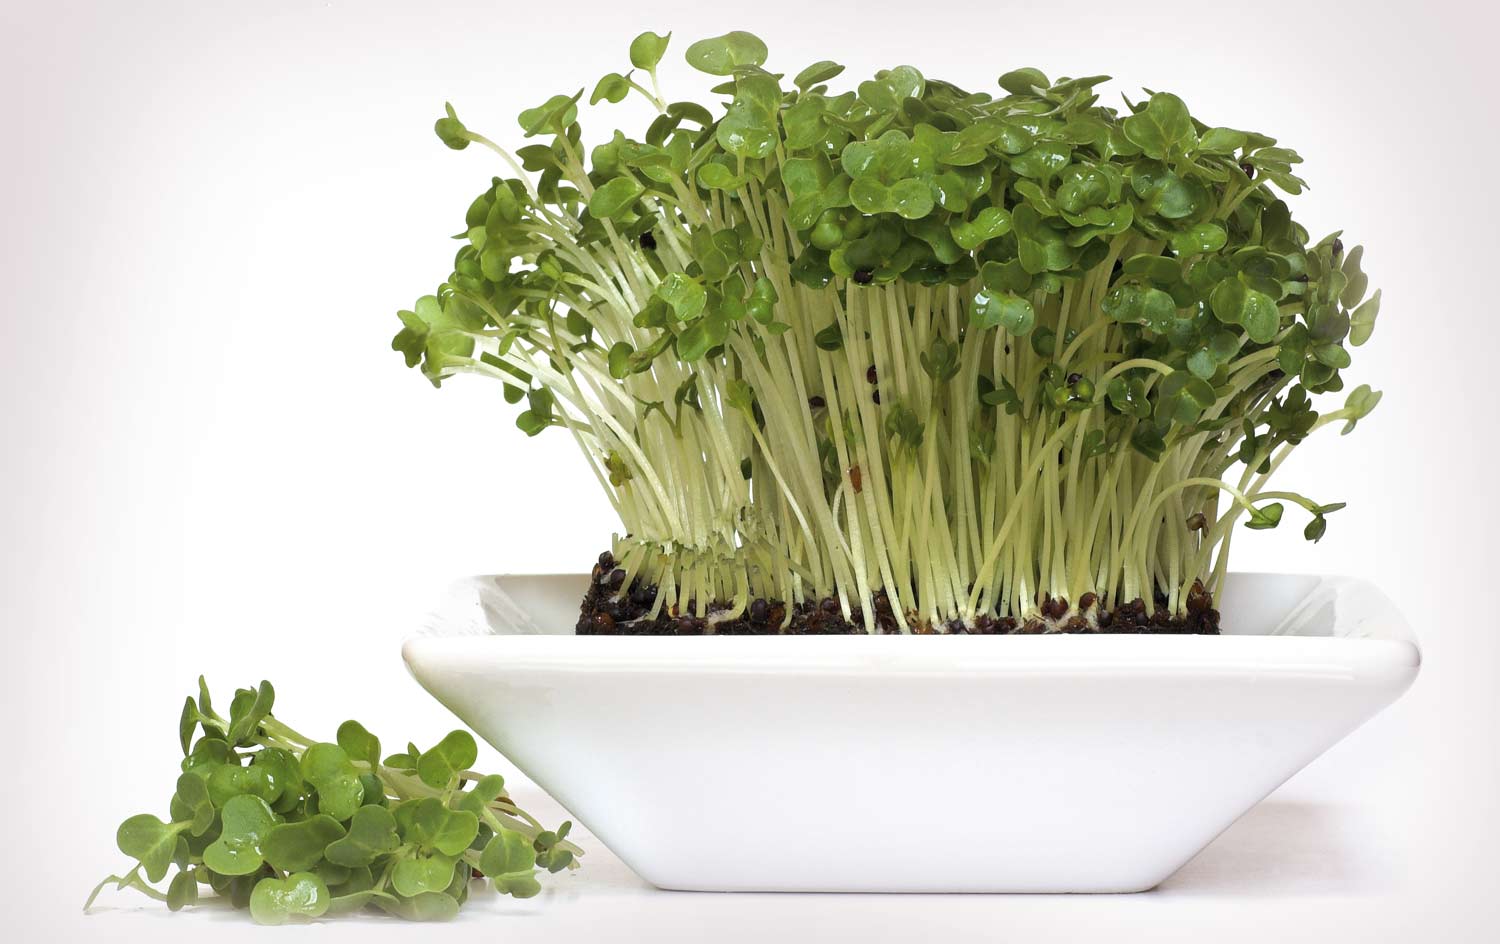 What is the garden cress plant